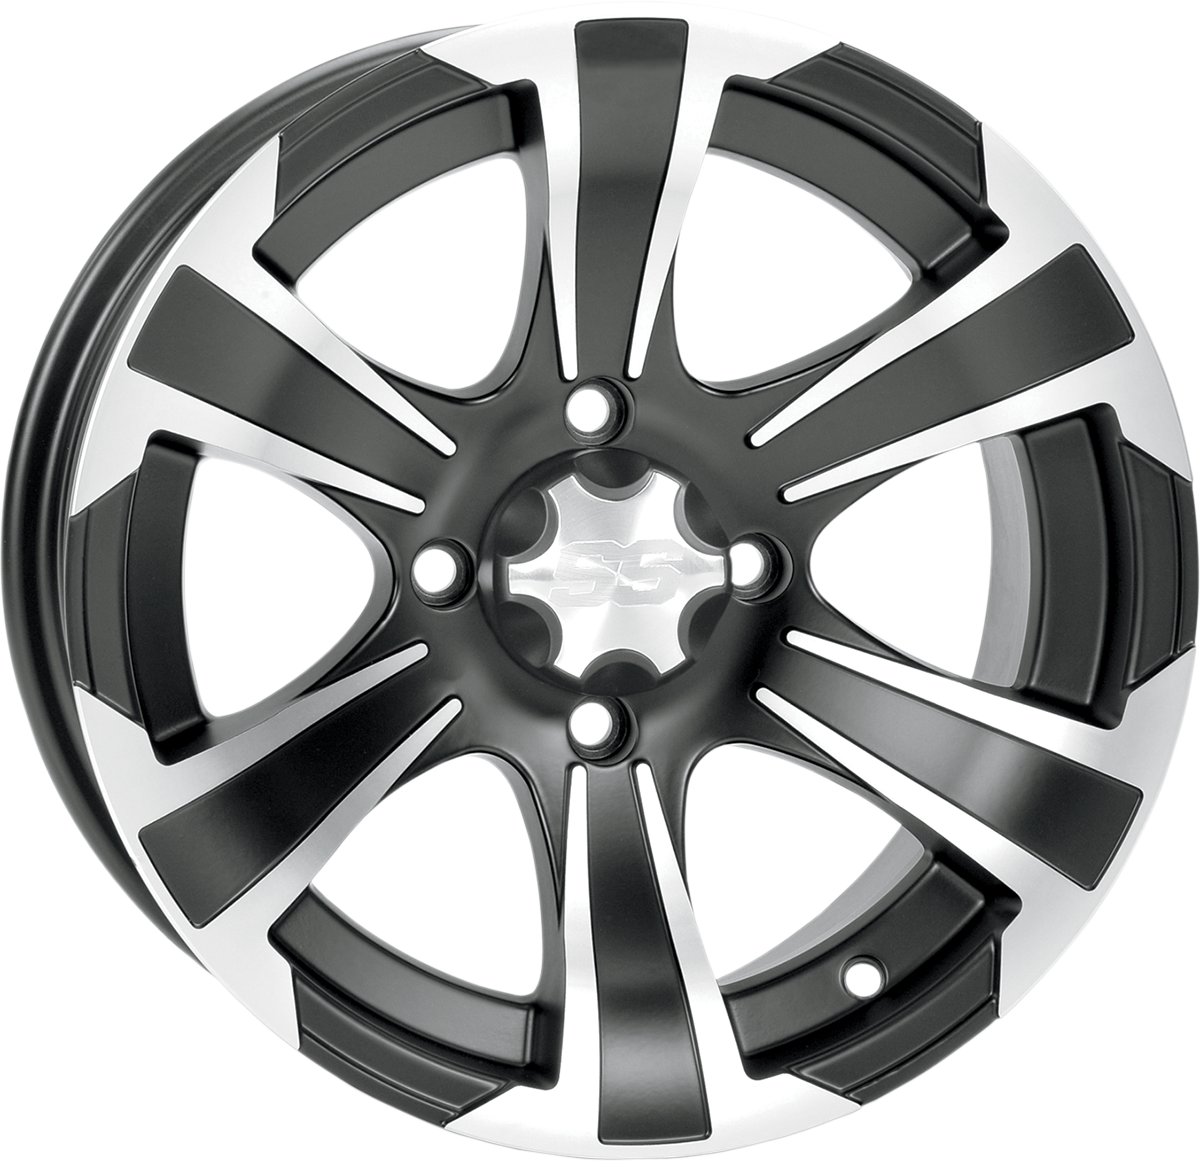 ITP SS312 Alloy Wheel - Front - Black Machined - 14x6 - 4/110 - 4+2 1428445536B